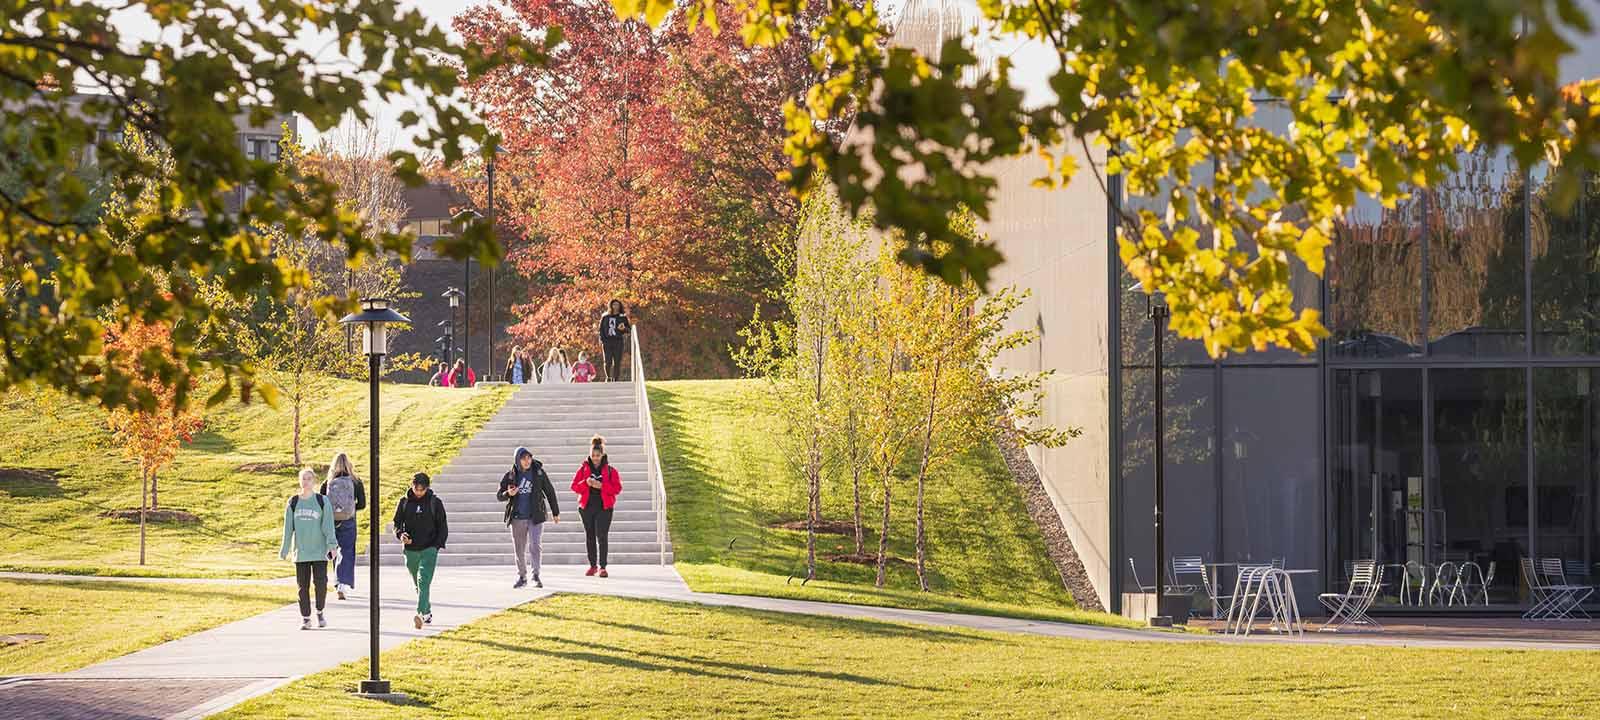 Students walking across the campus green.